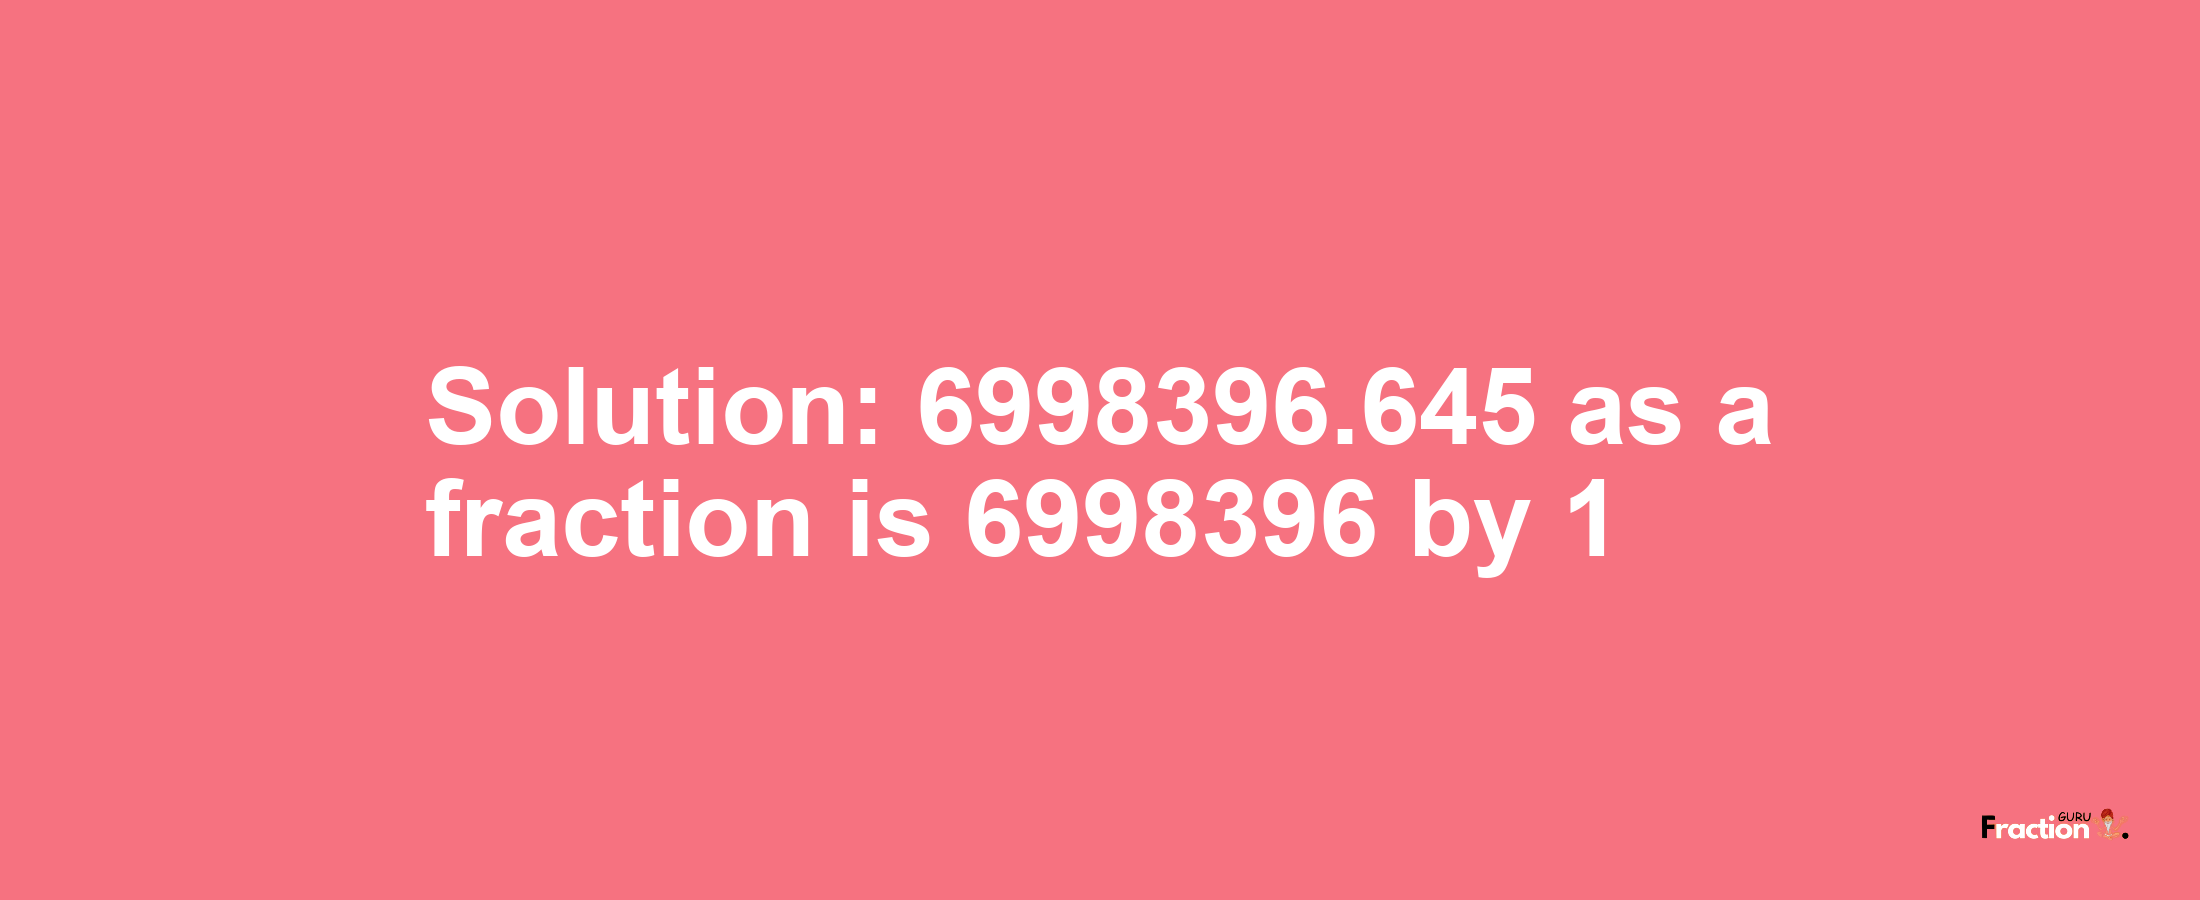 Solution:6998396.645 as a fraction is 6998396/1